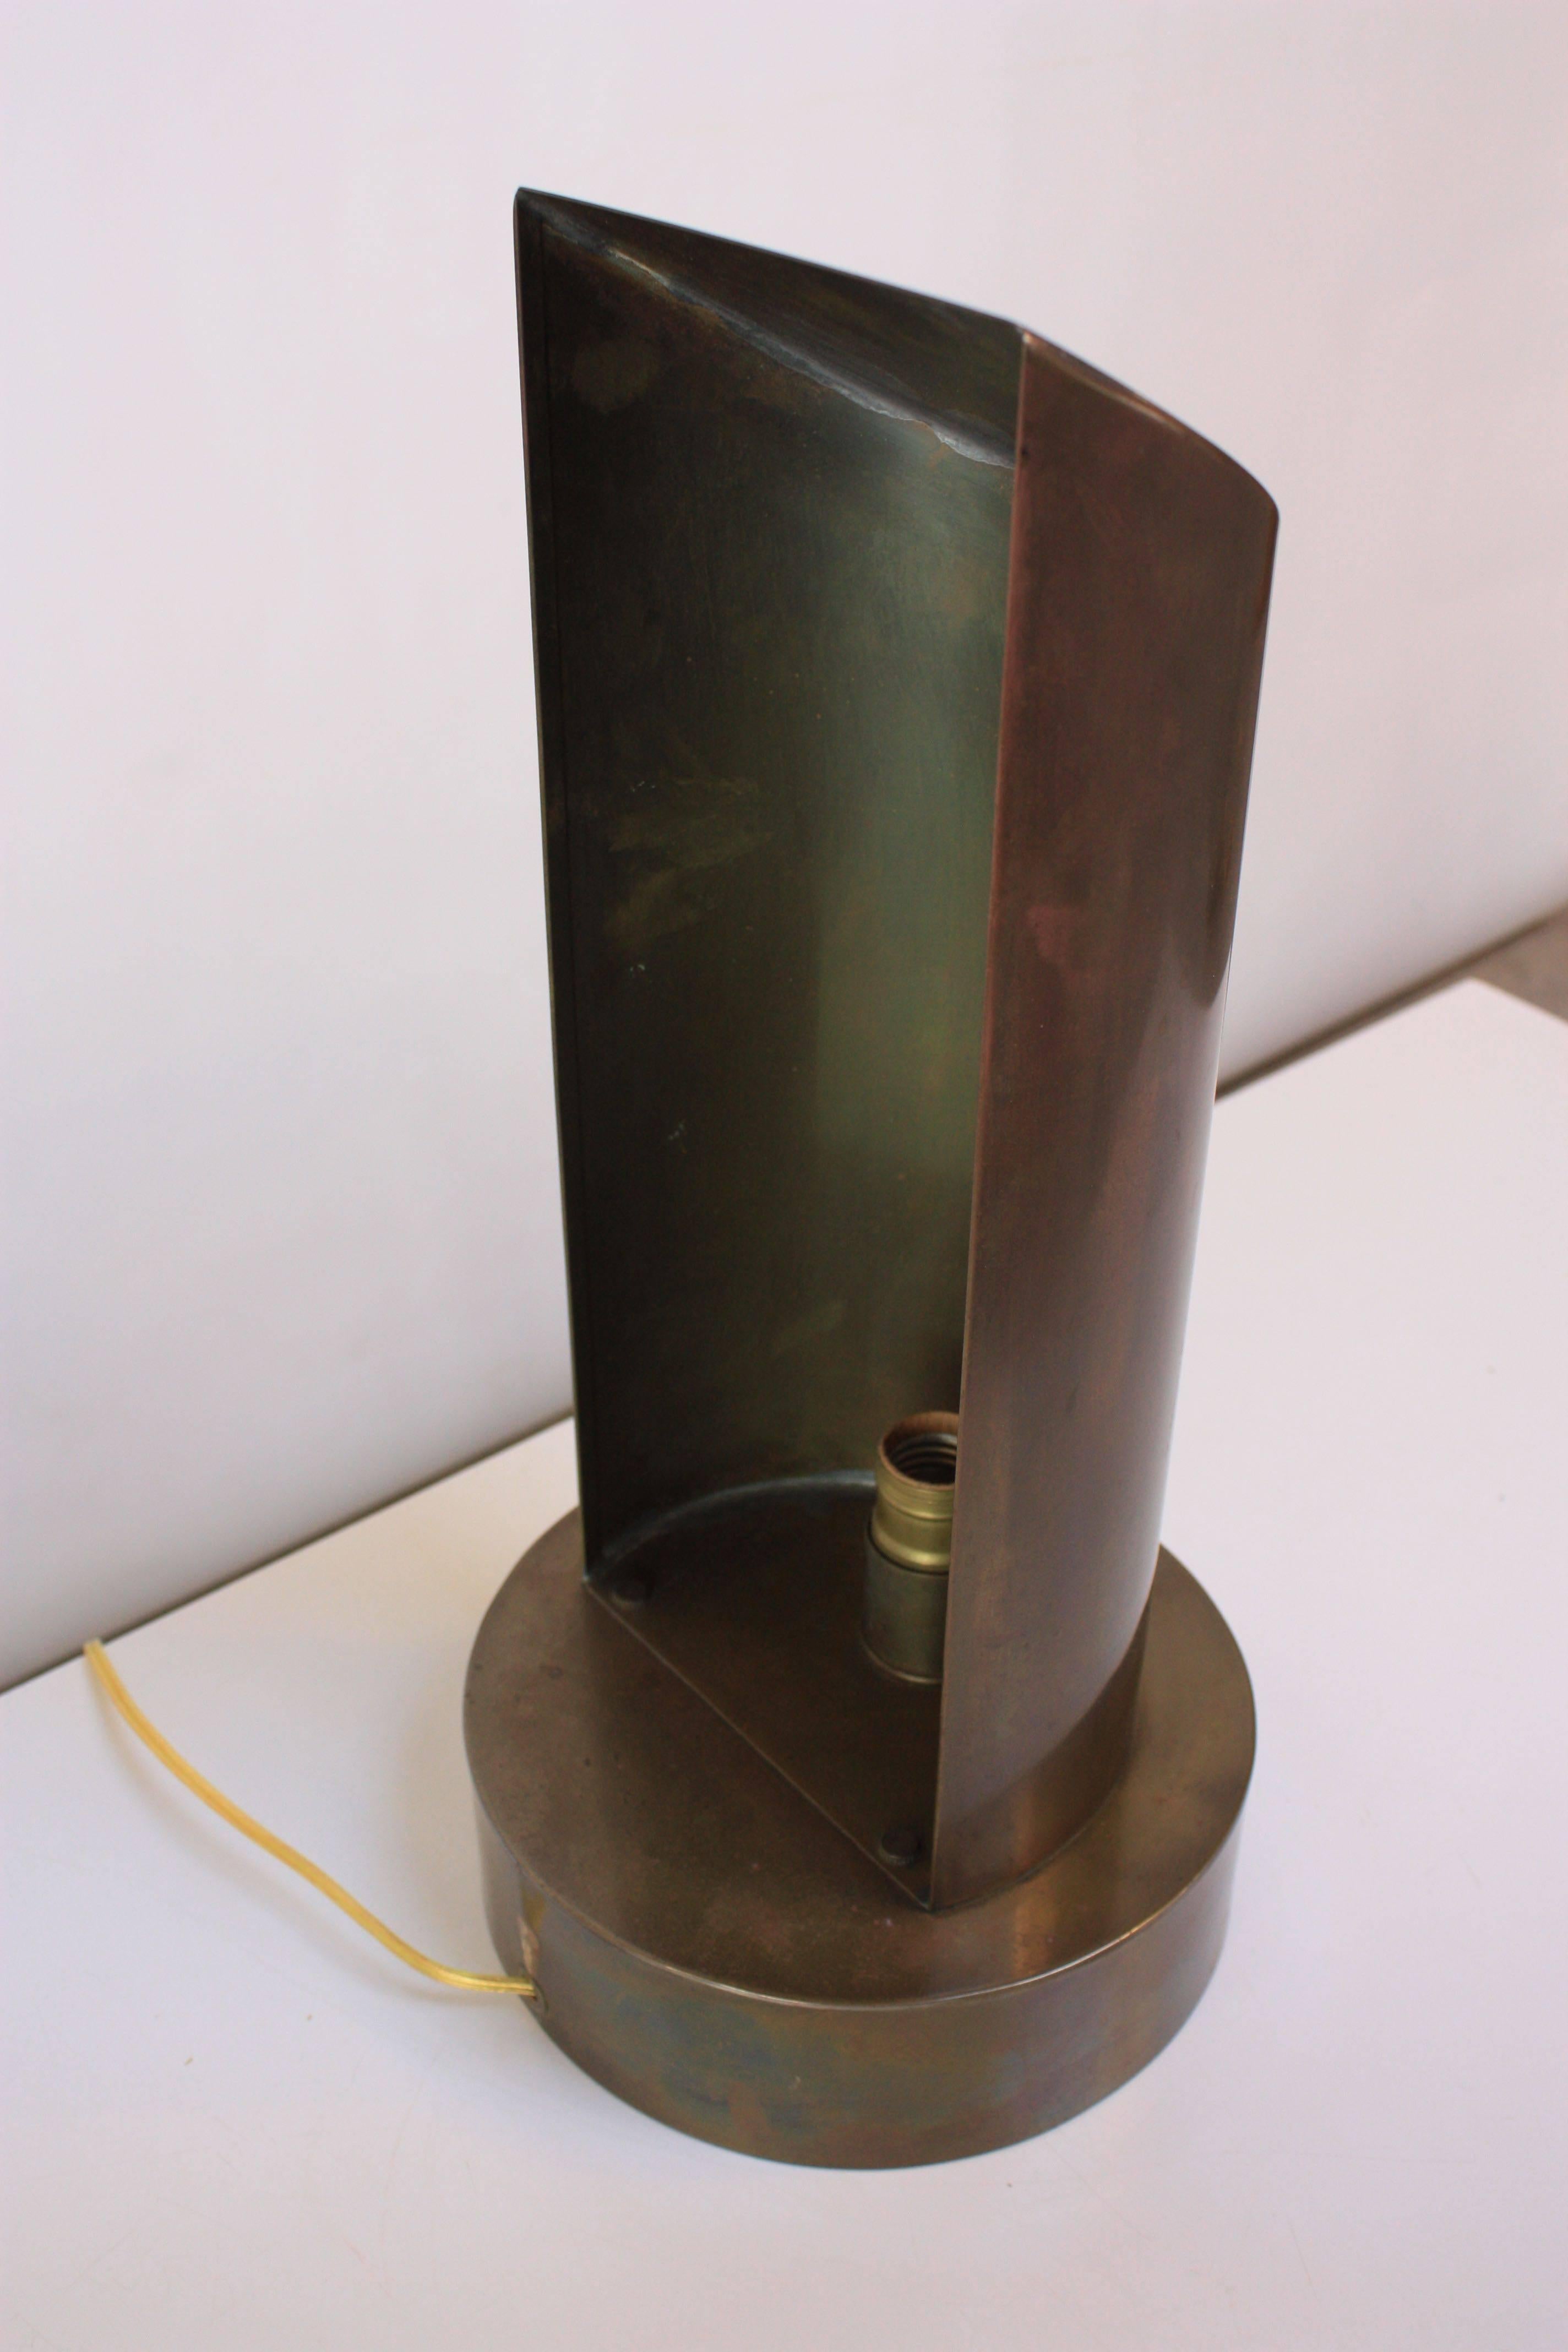 This table sconce was designed by Chapman in the 1970s combining Industrial and modern design. Comprised entirely of brass this piece also features the signature bronze finish and dimmer 'ball' knob.